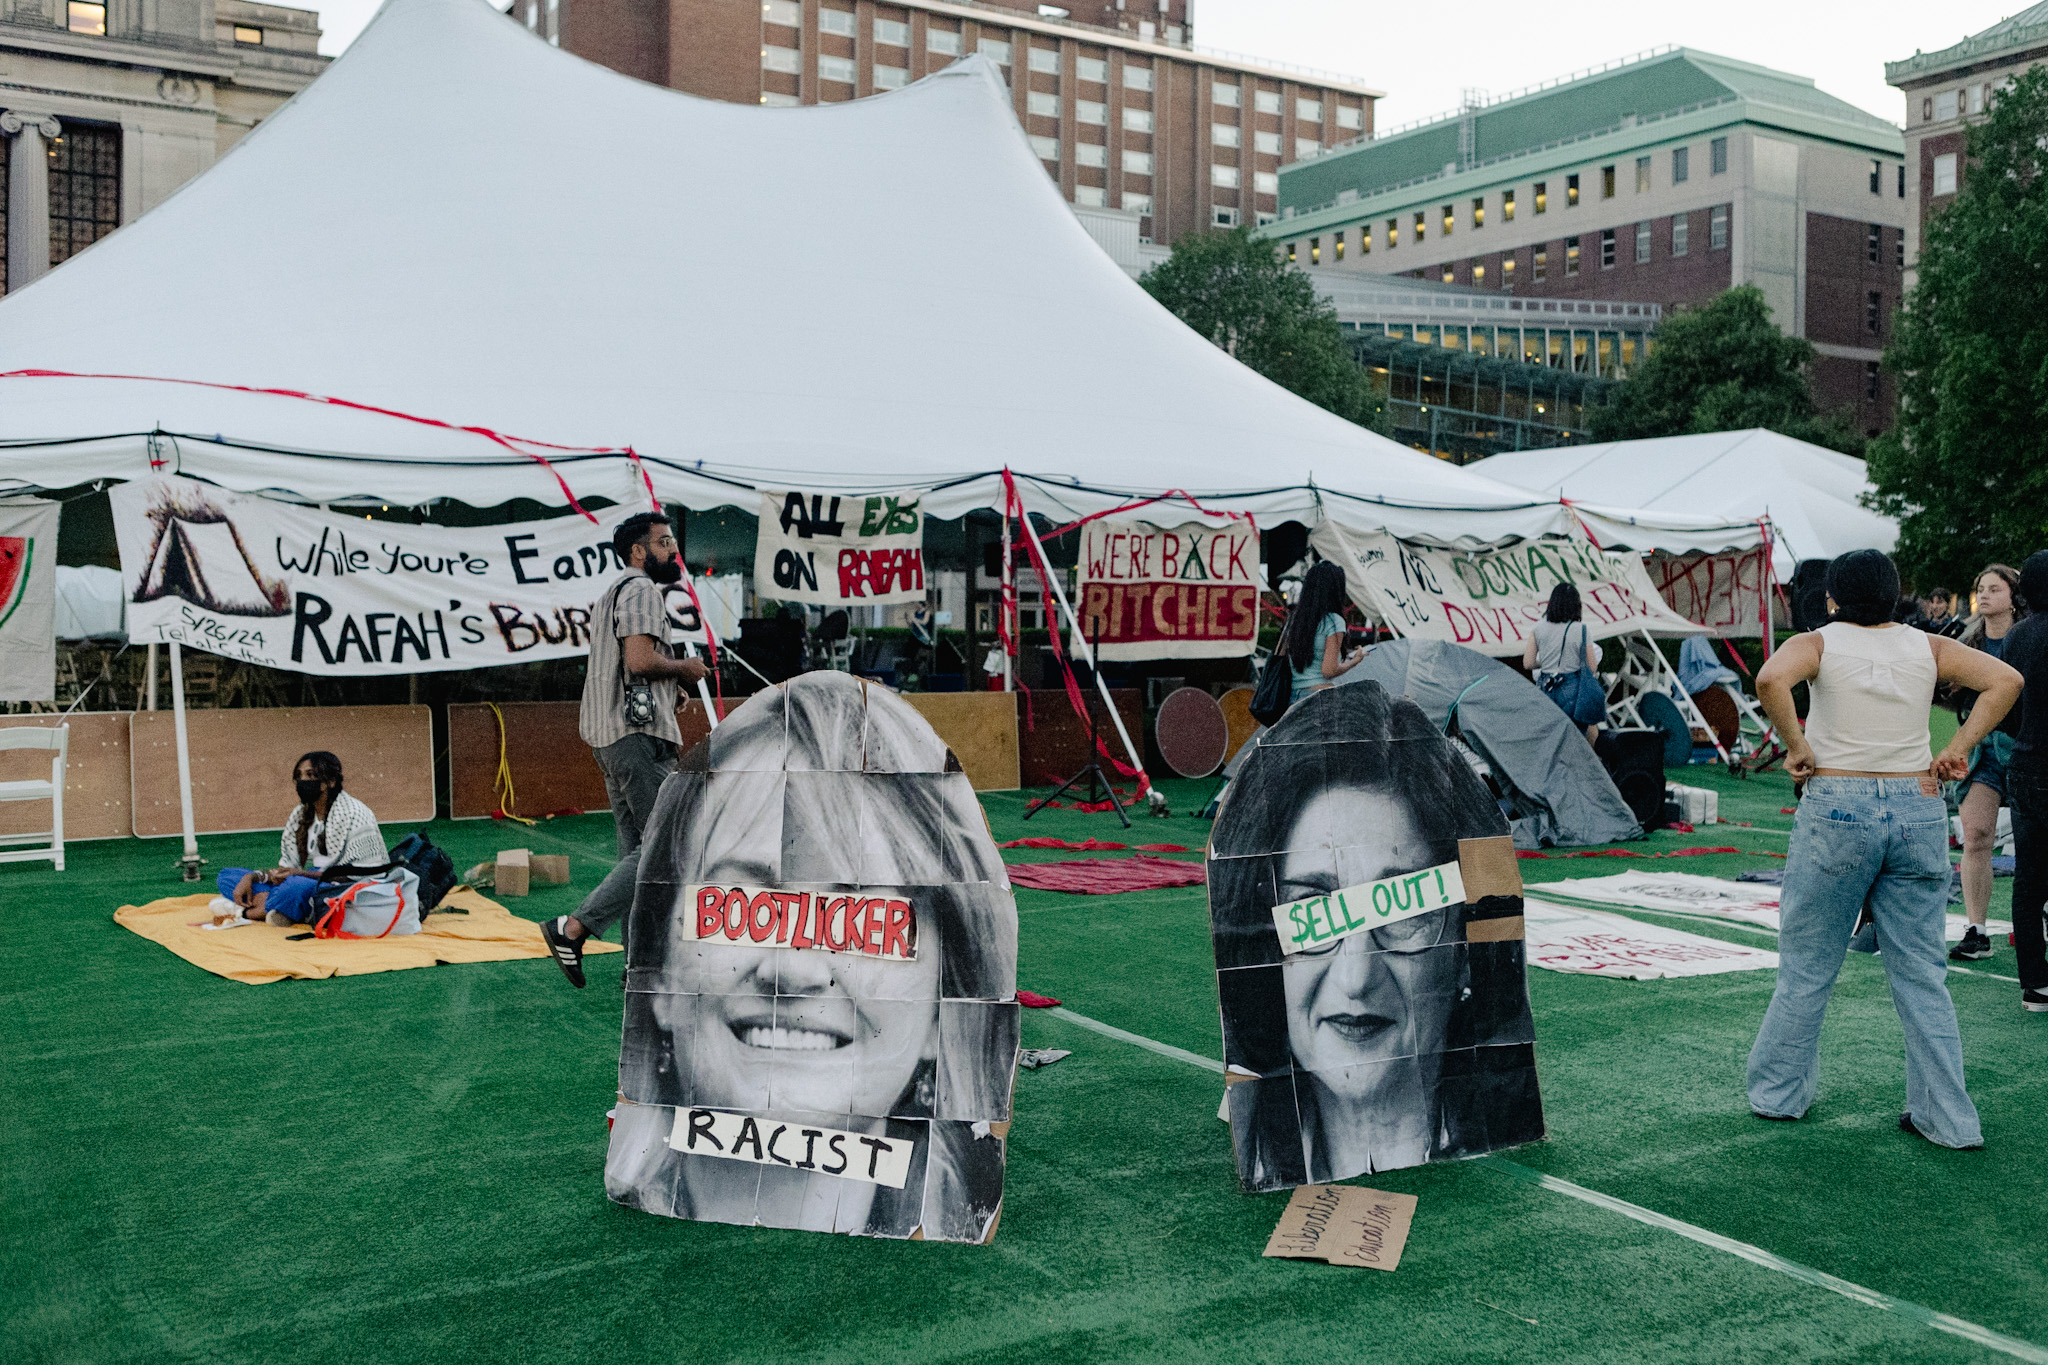 A photo of the west side of the South Lawn in front of Columbia University's Butler Library at the Morningside campus. This picture, taken right before sunset, depicts an encampment set up by protestors on a lawn with turf and a big event tent. Students are scattered throughout, and there are multiple banners and signs depicting pro-Palestine statements.